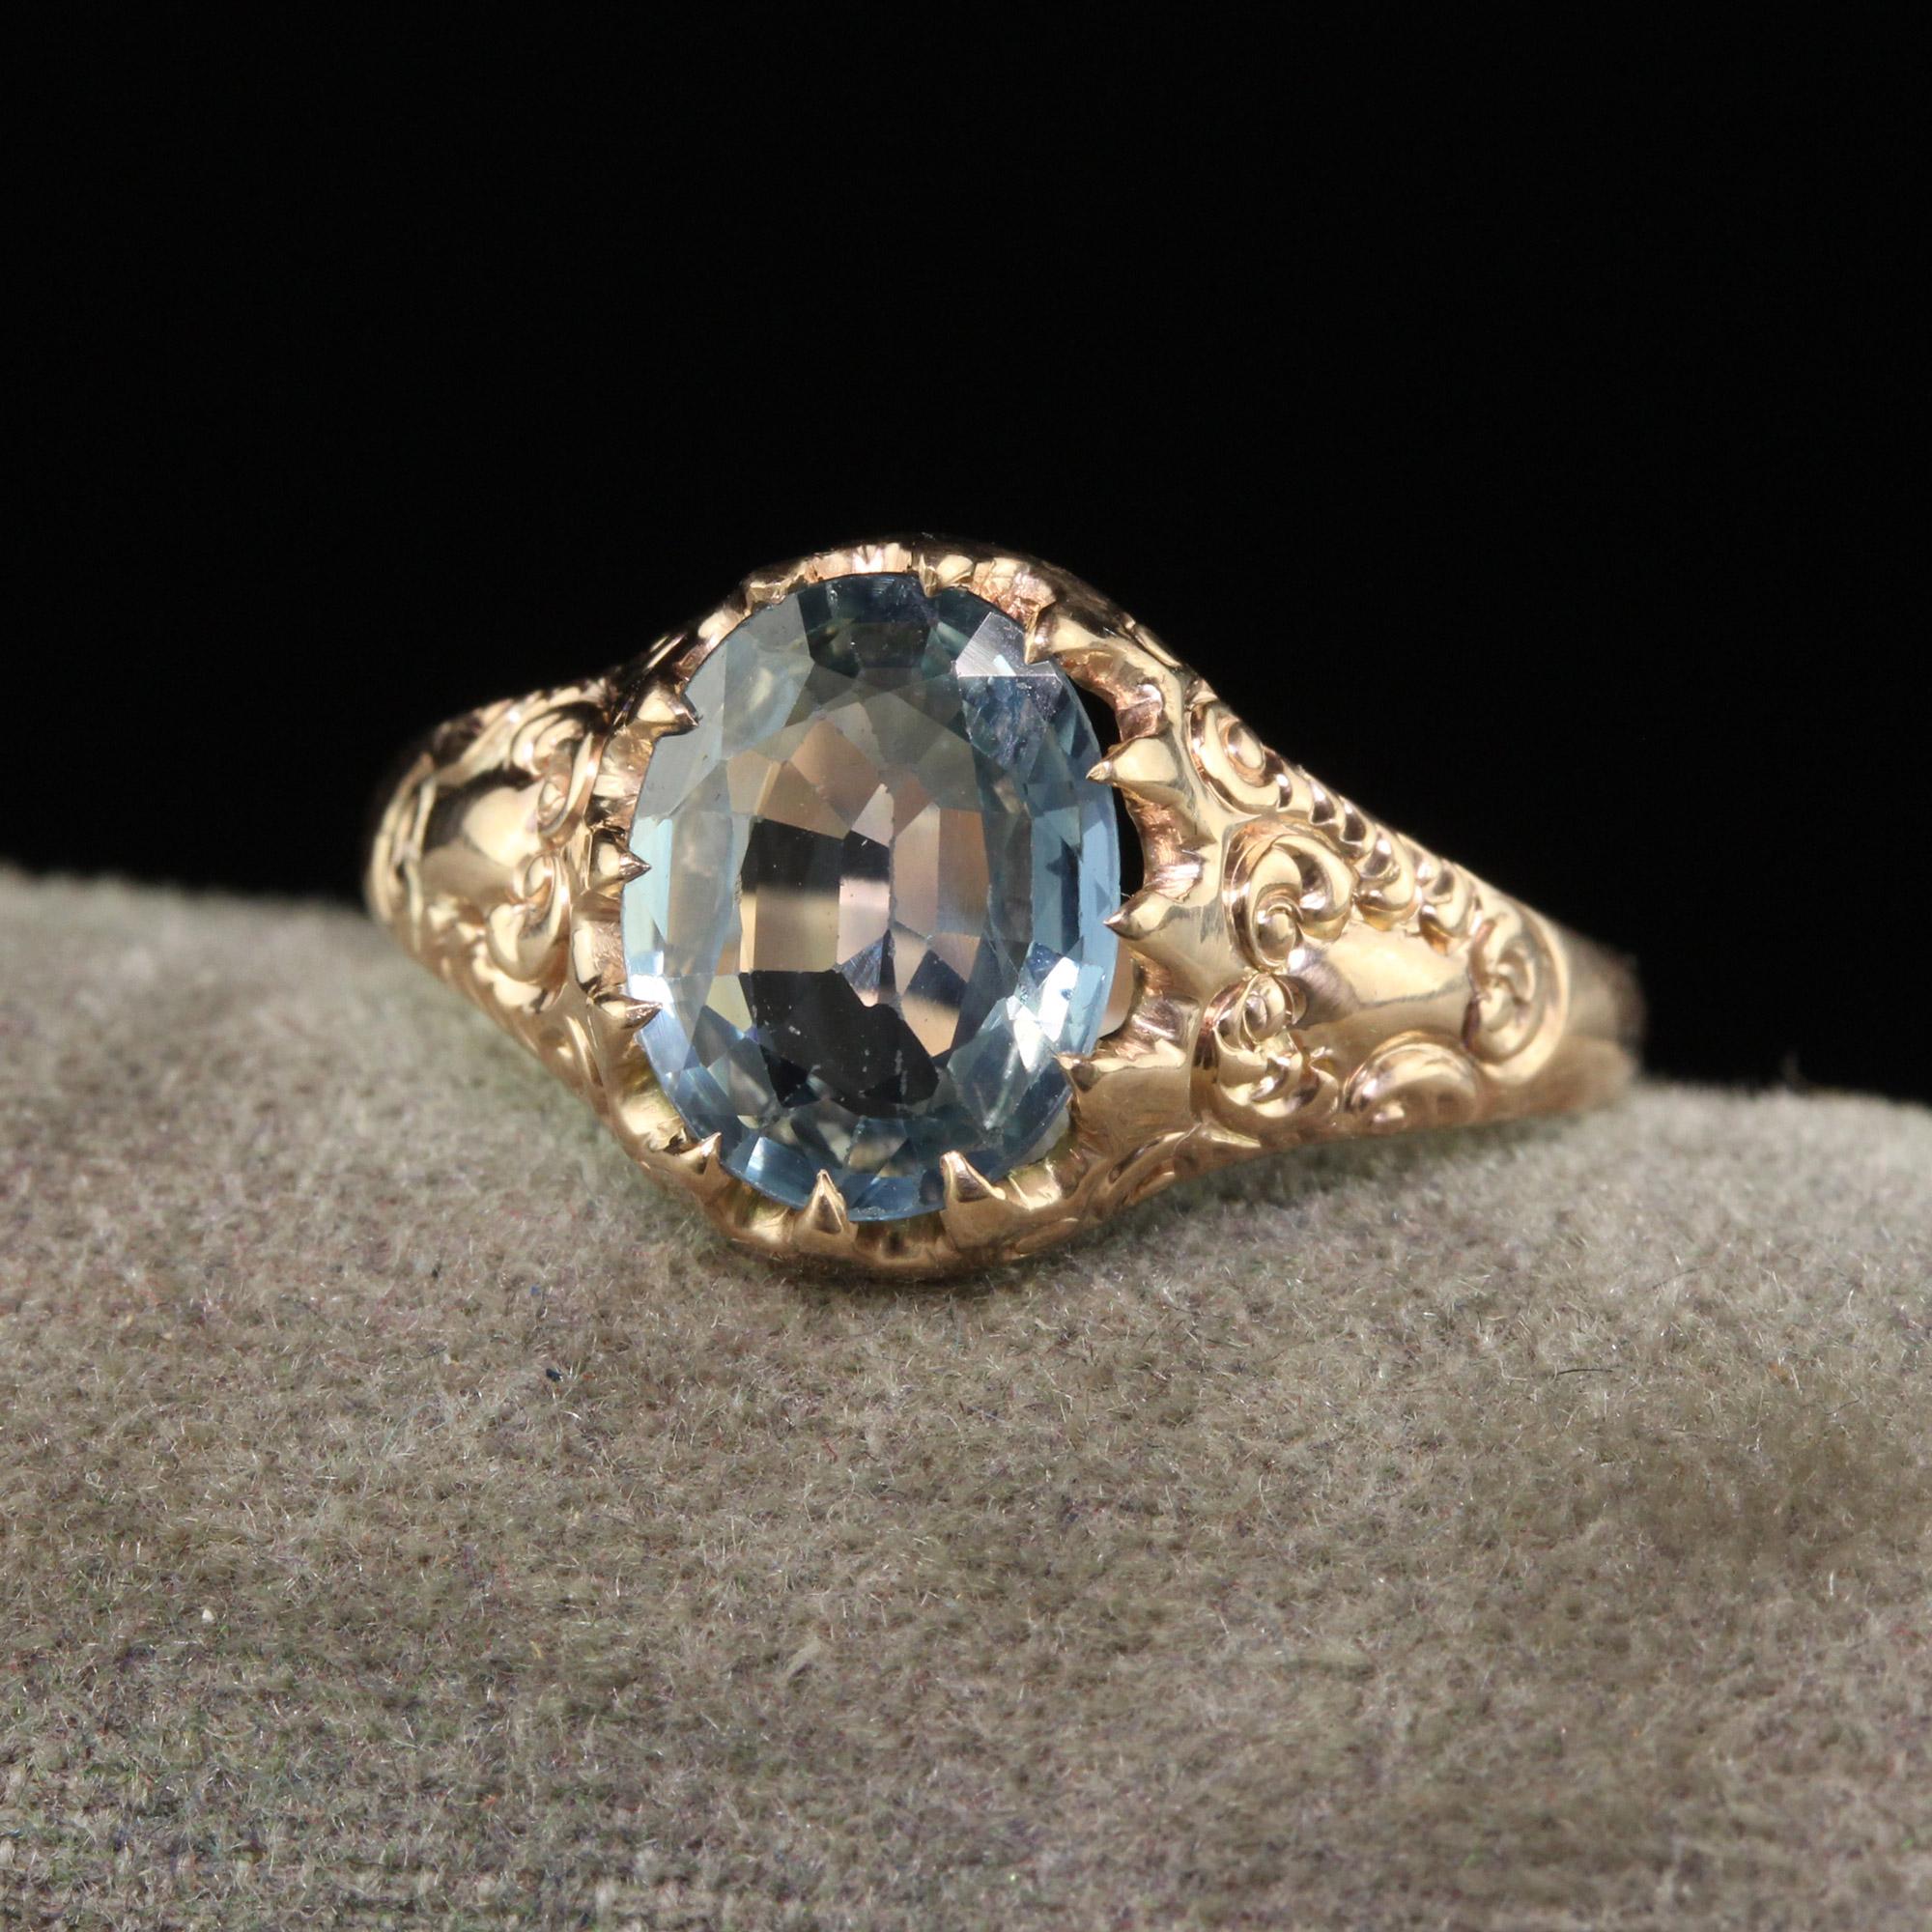 Beautiful Antique Victorian 10K Yellow Gold Natural Unheated Sapphire Engagement Ring. This gorgeous engagement ring is crafted in 10k yellow gold. The center of the ring holds a natural old cut sapphire with a beautiful baby blue color and has an